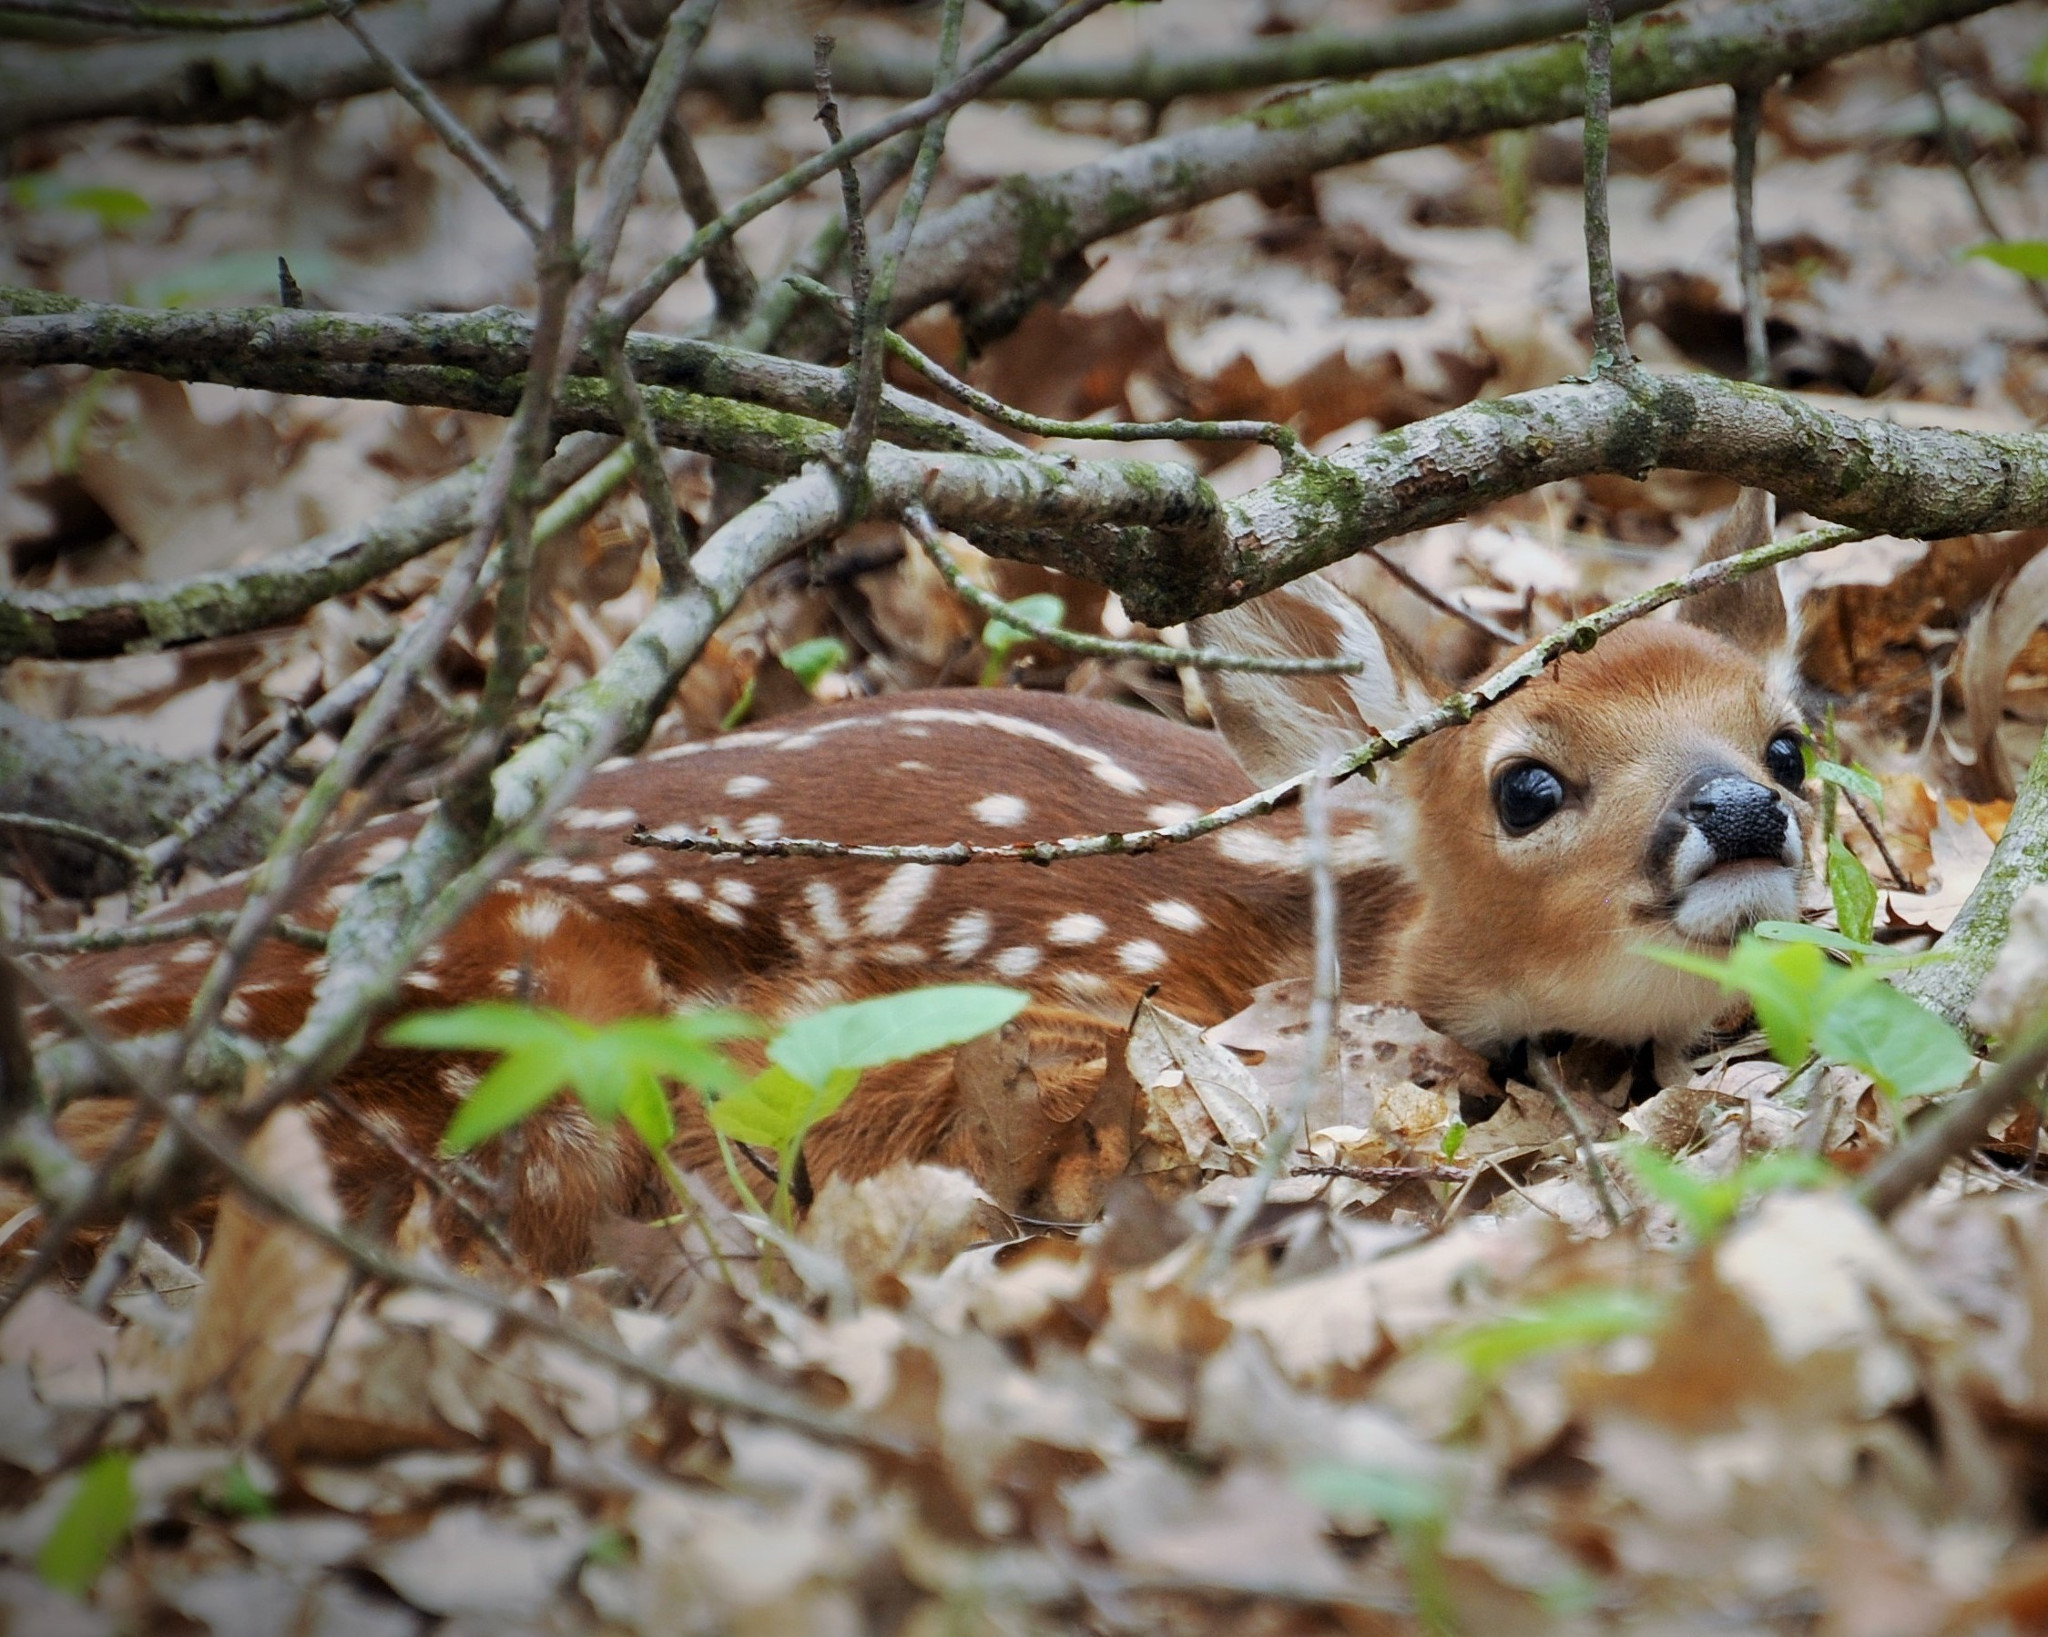 fawn hides in a pile of leaves under fallen branches